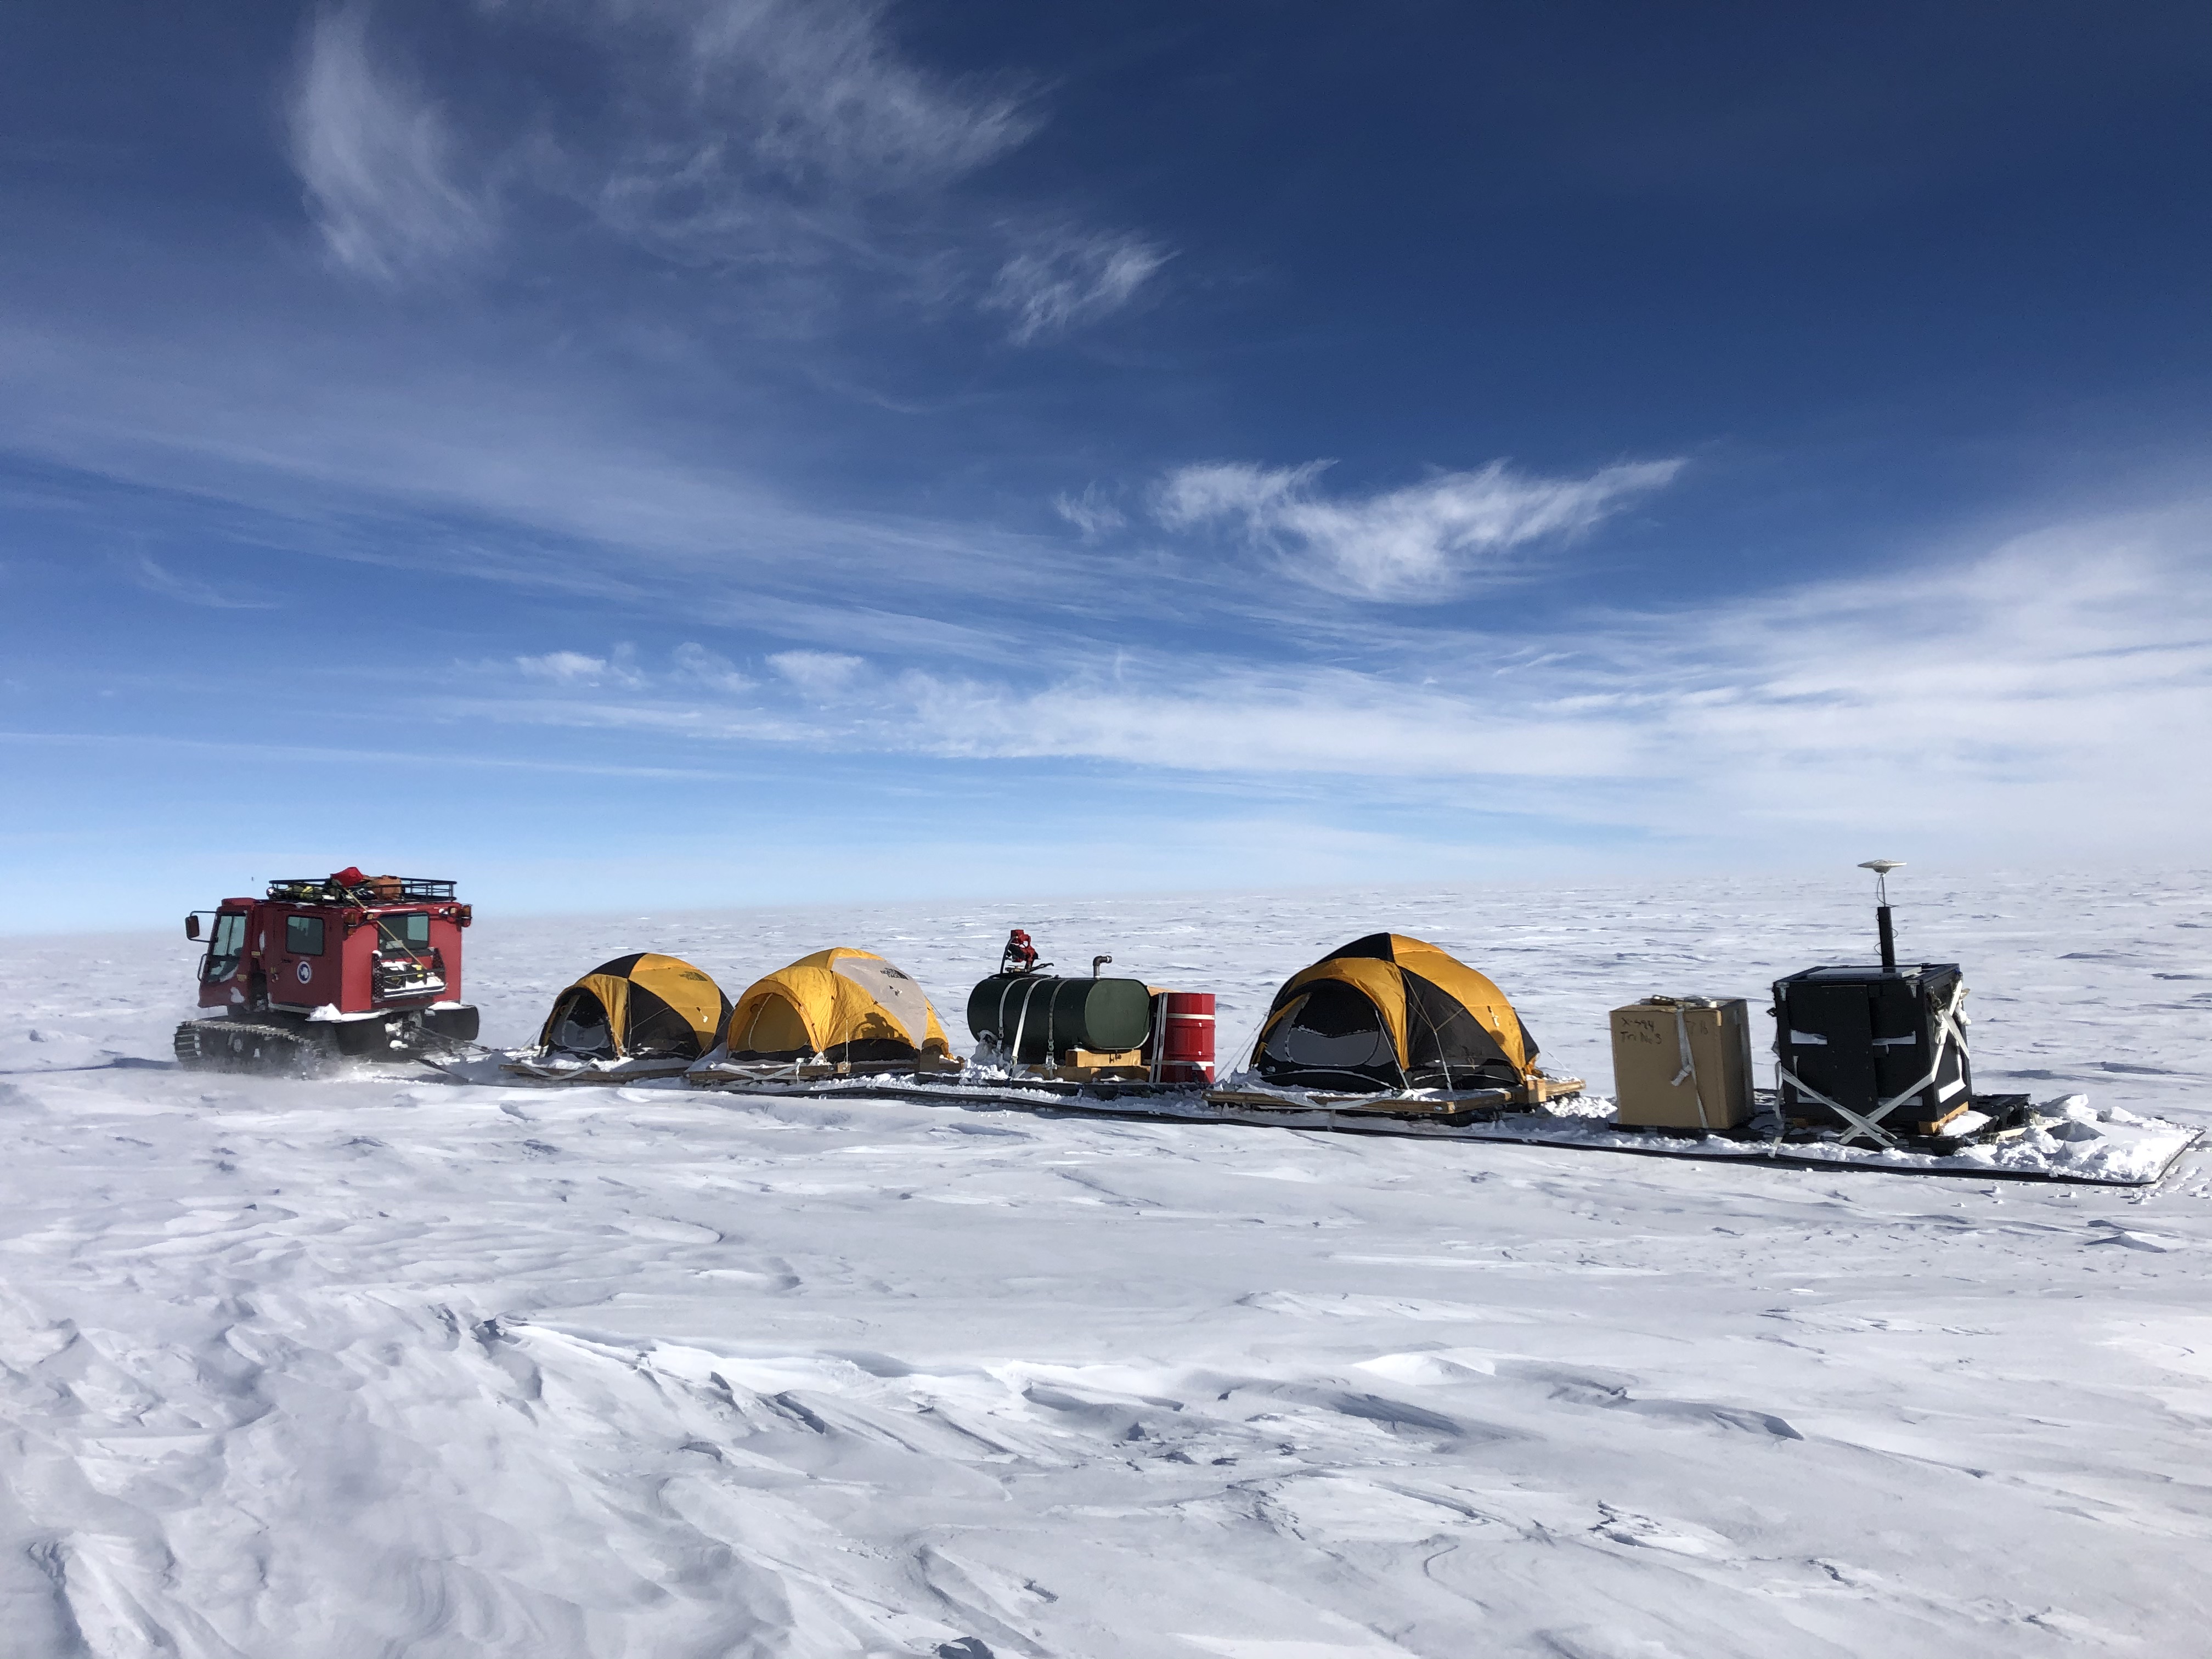  UMD researcher Kelly Brunt traversed the Antarctic taking measurements to verify satellite-based elevation data. For weeks at a time, the four-person crew lived in tents and towed everything they needed for survival on sleds through the frozen landscape. Photo Courtesy: Kelly Brunt.